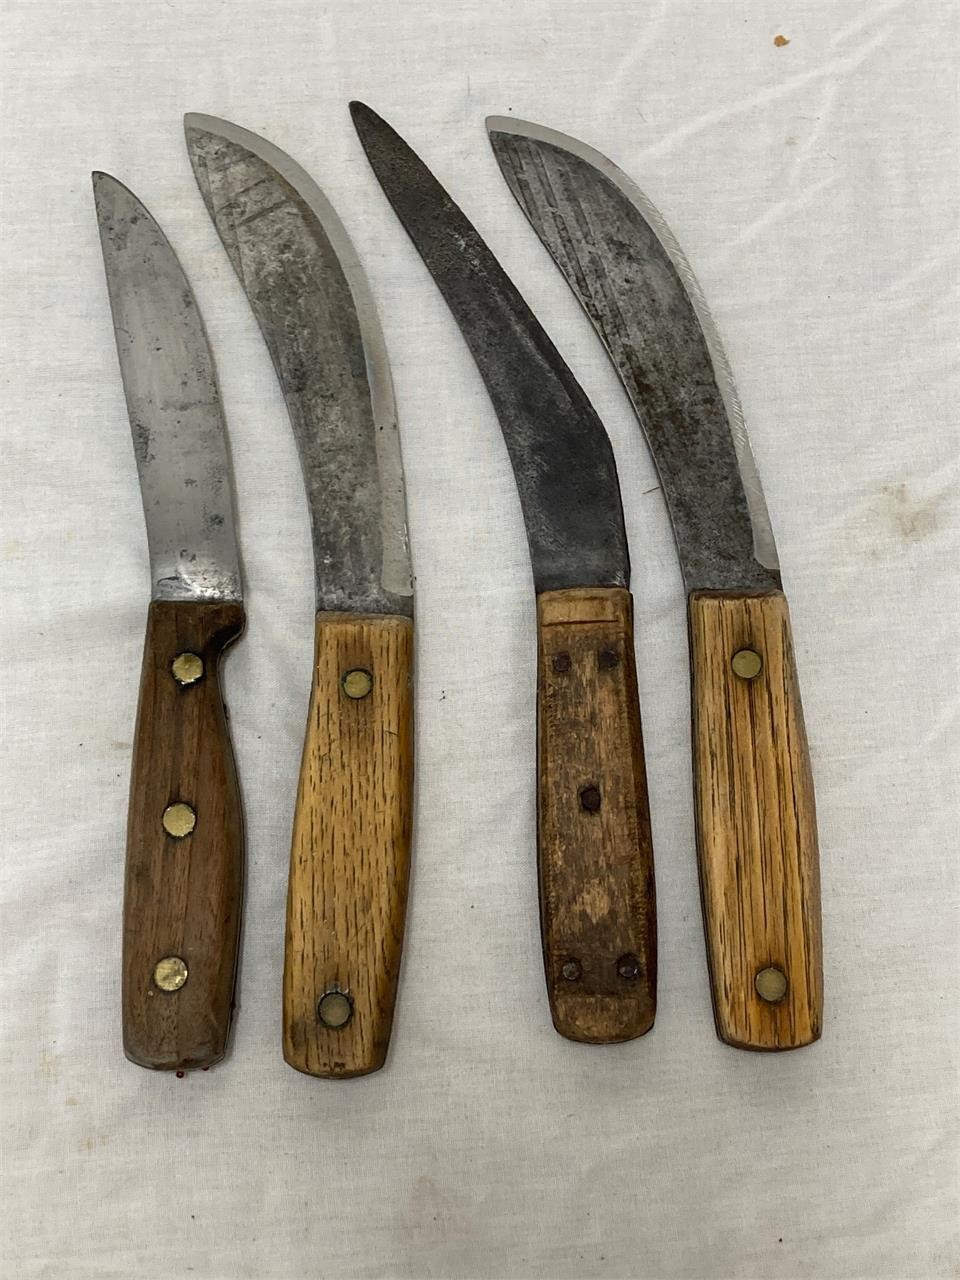 4 knives. Wood handles. 5 to 6” blades.